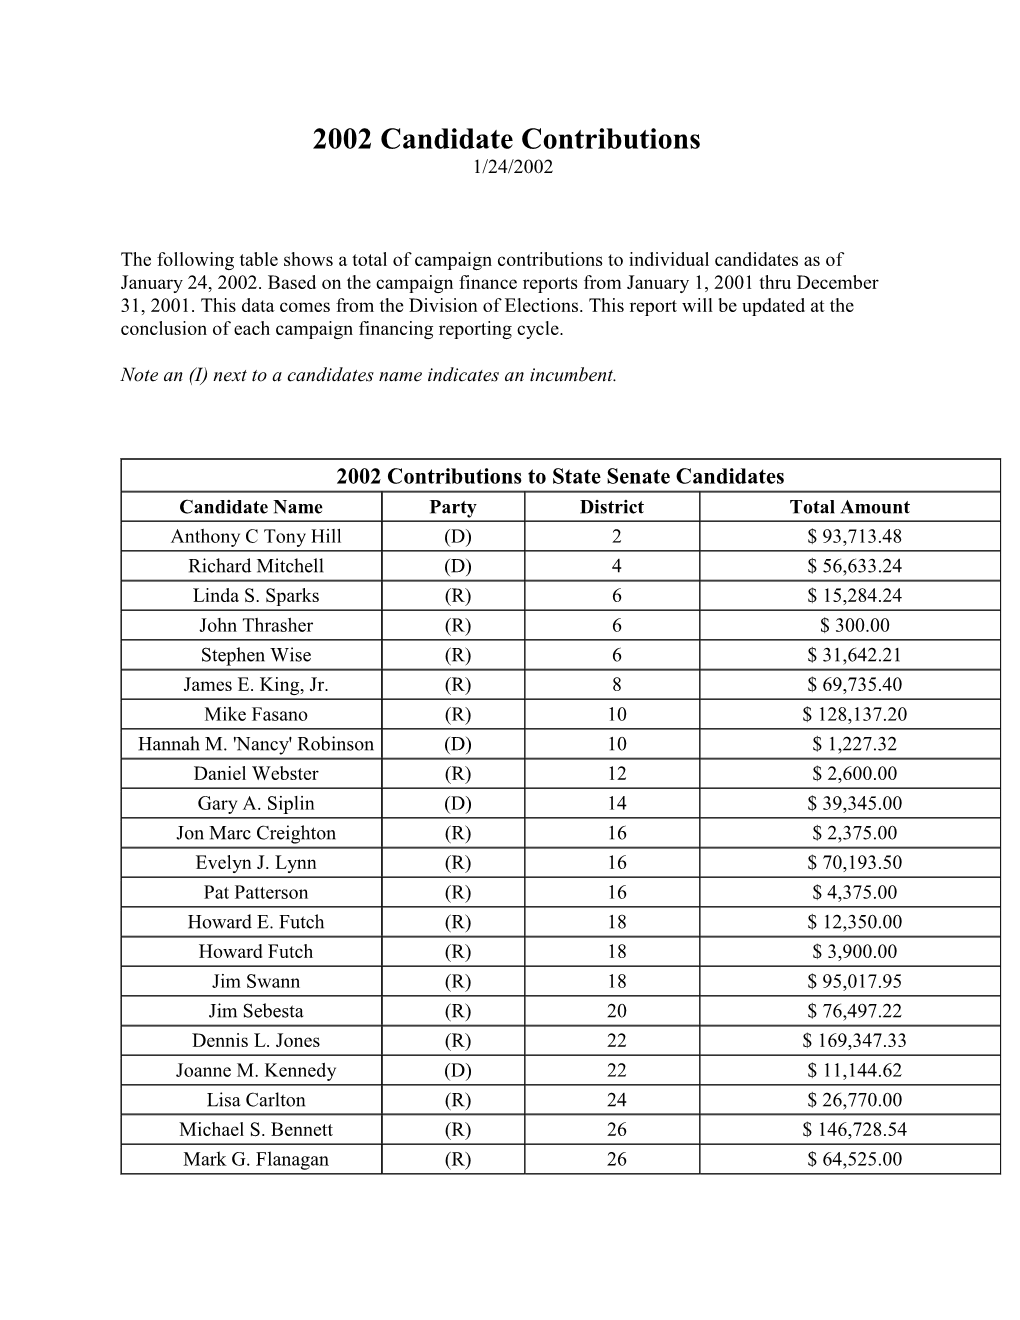 2002 Candidate Contributions 1/24/2002